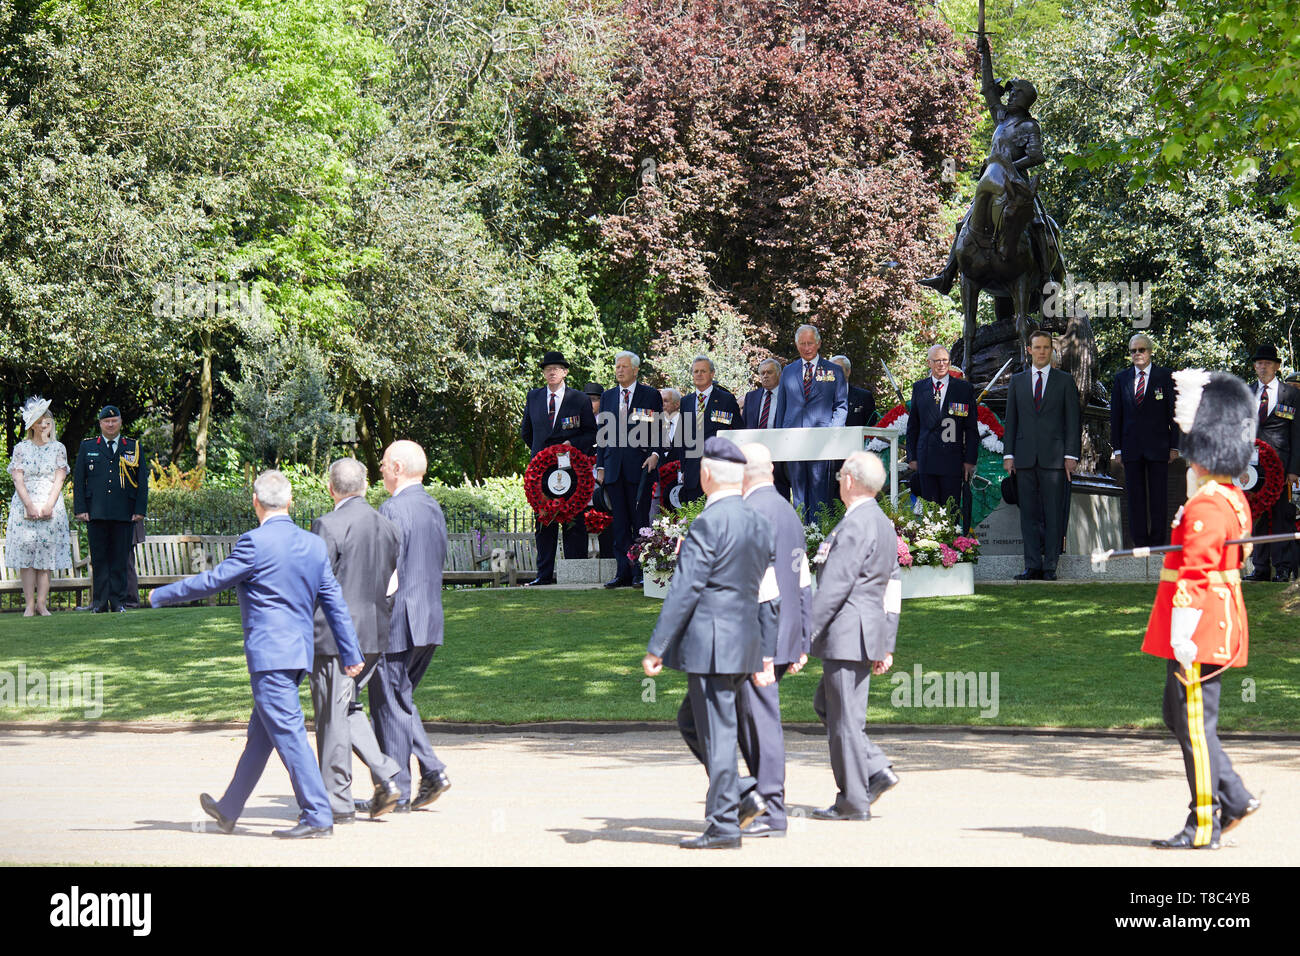 London, U.K. - 12 May, 2019: HRH Prince of Wales inspects past and present cavalrymen as part of the 94th annual parade of the Combined Cavalry Old Comrades Association in Hyde Park. Stock Photo